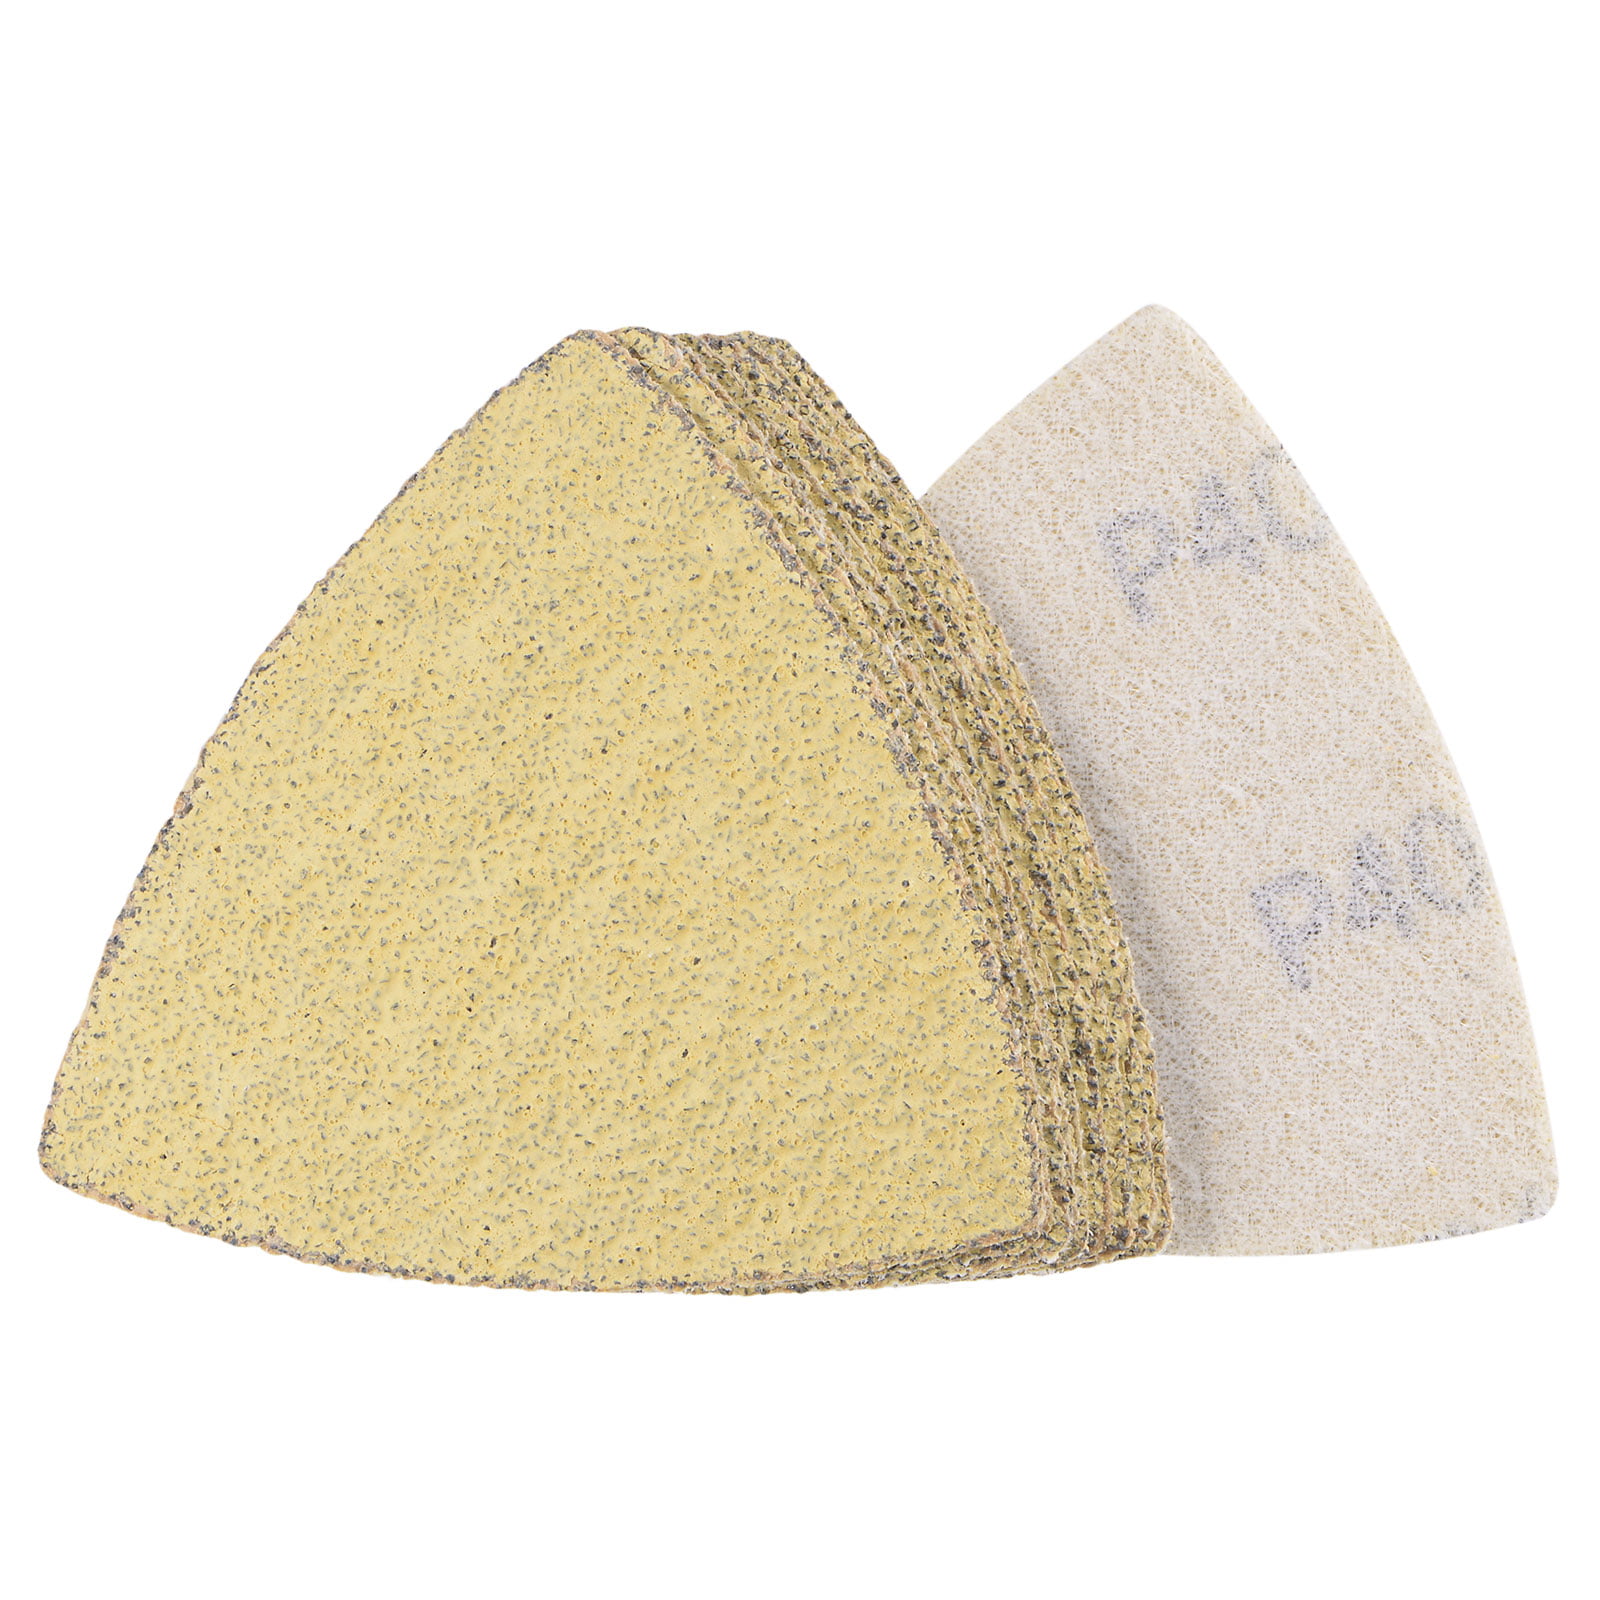 20 pieces 3inch Triangular Sandpaper with Hook and Loop Backing Grit 320 